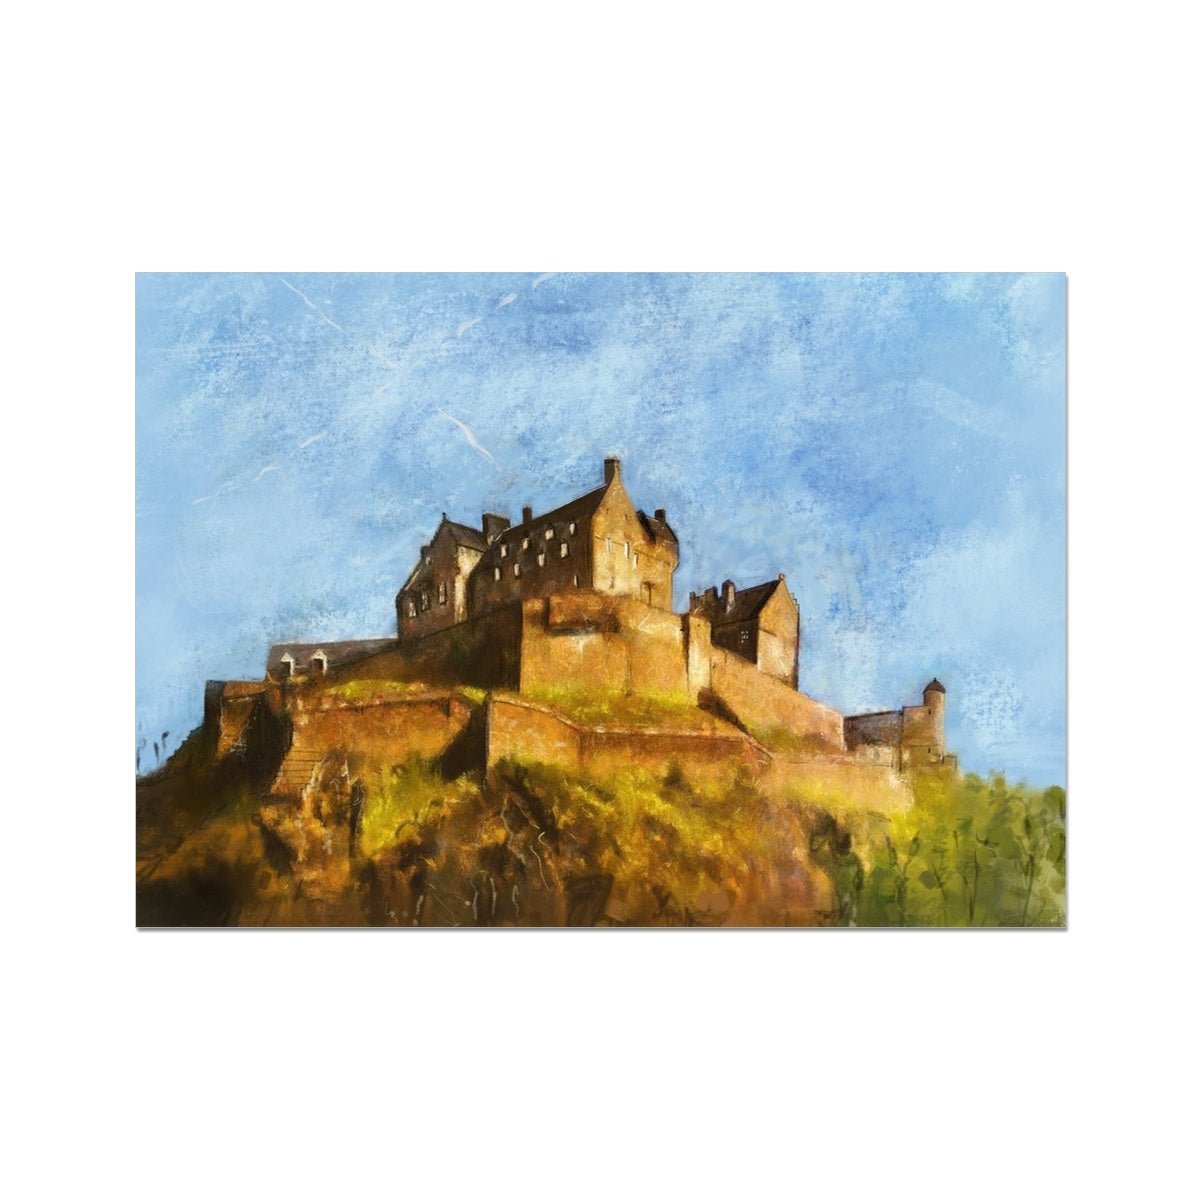 Edinburgh Castle Painting | Fine Art Prints From Scotland-Unframed Prints-Historic & Iconic Scotland Art Gallery-A2 Landscape-Paintings, Prints, Homeware, Art Gifts From Scotland By Scottish Artist Kevin Hunter